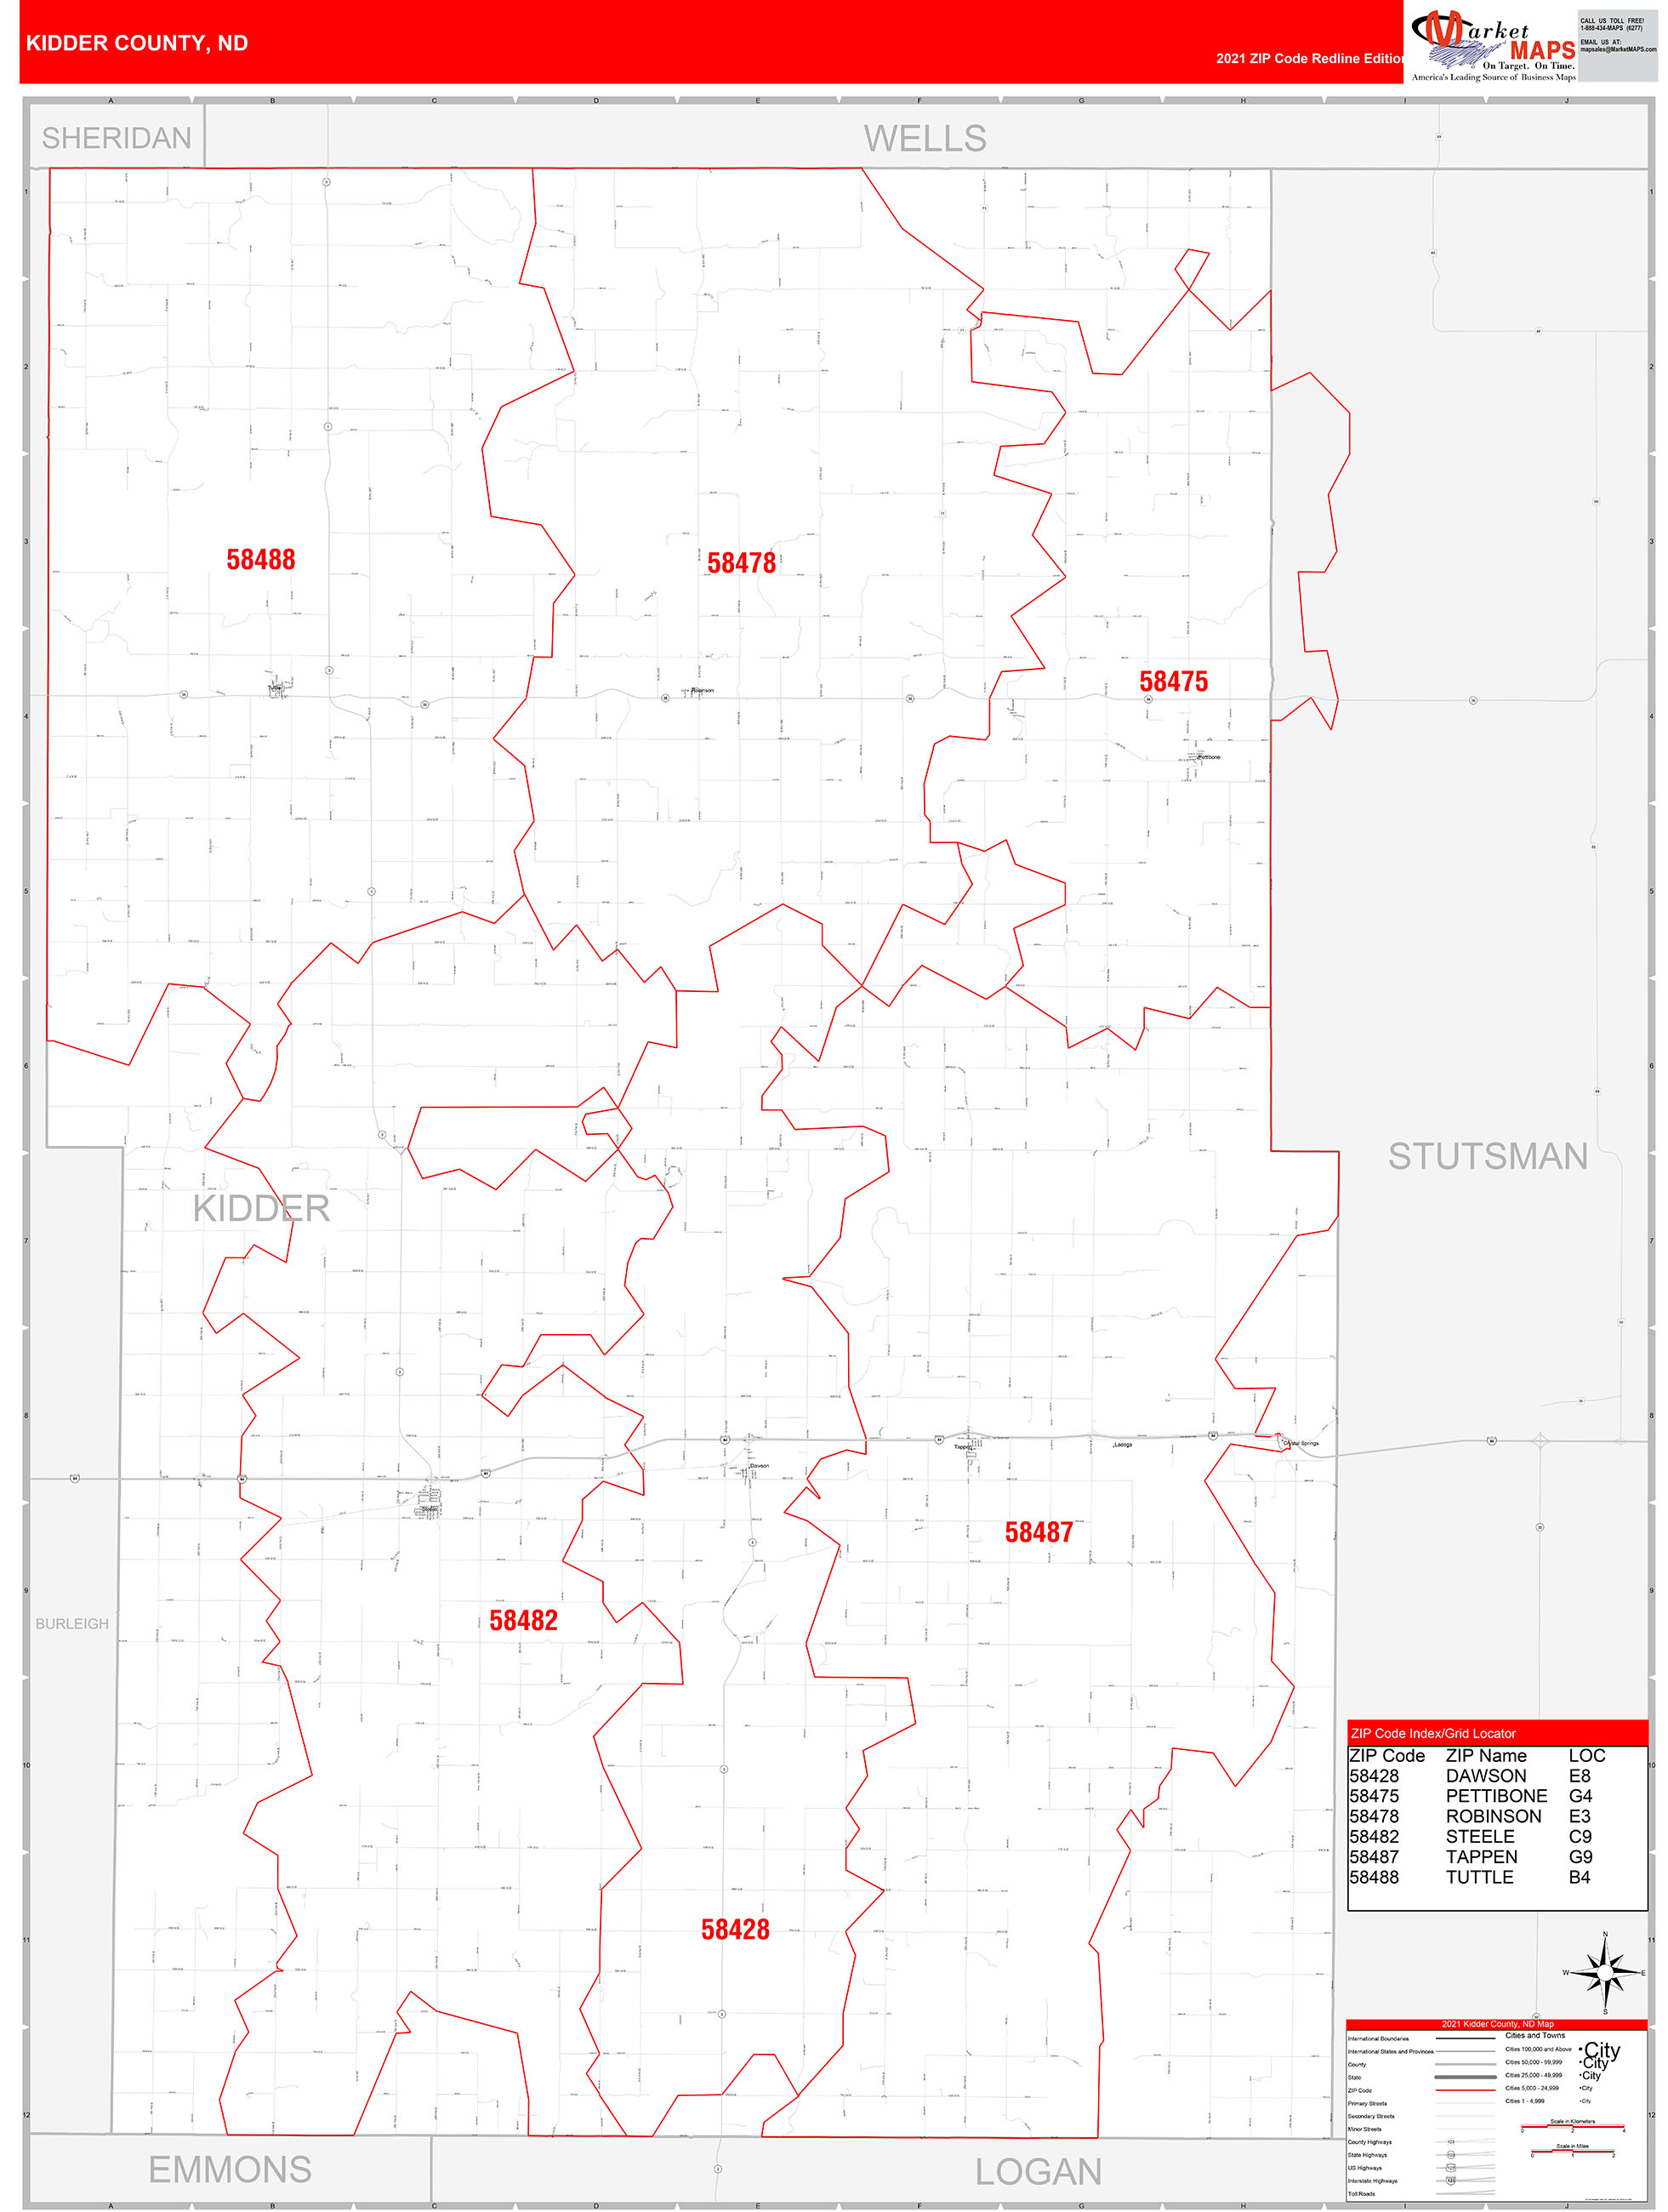 Kidder County, ND Zip Code Wall Map Red Line Style by MarketMAPS